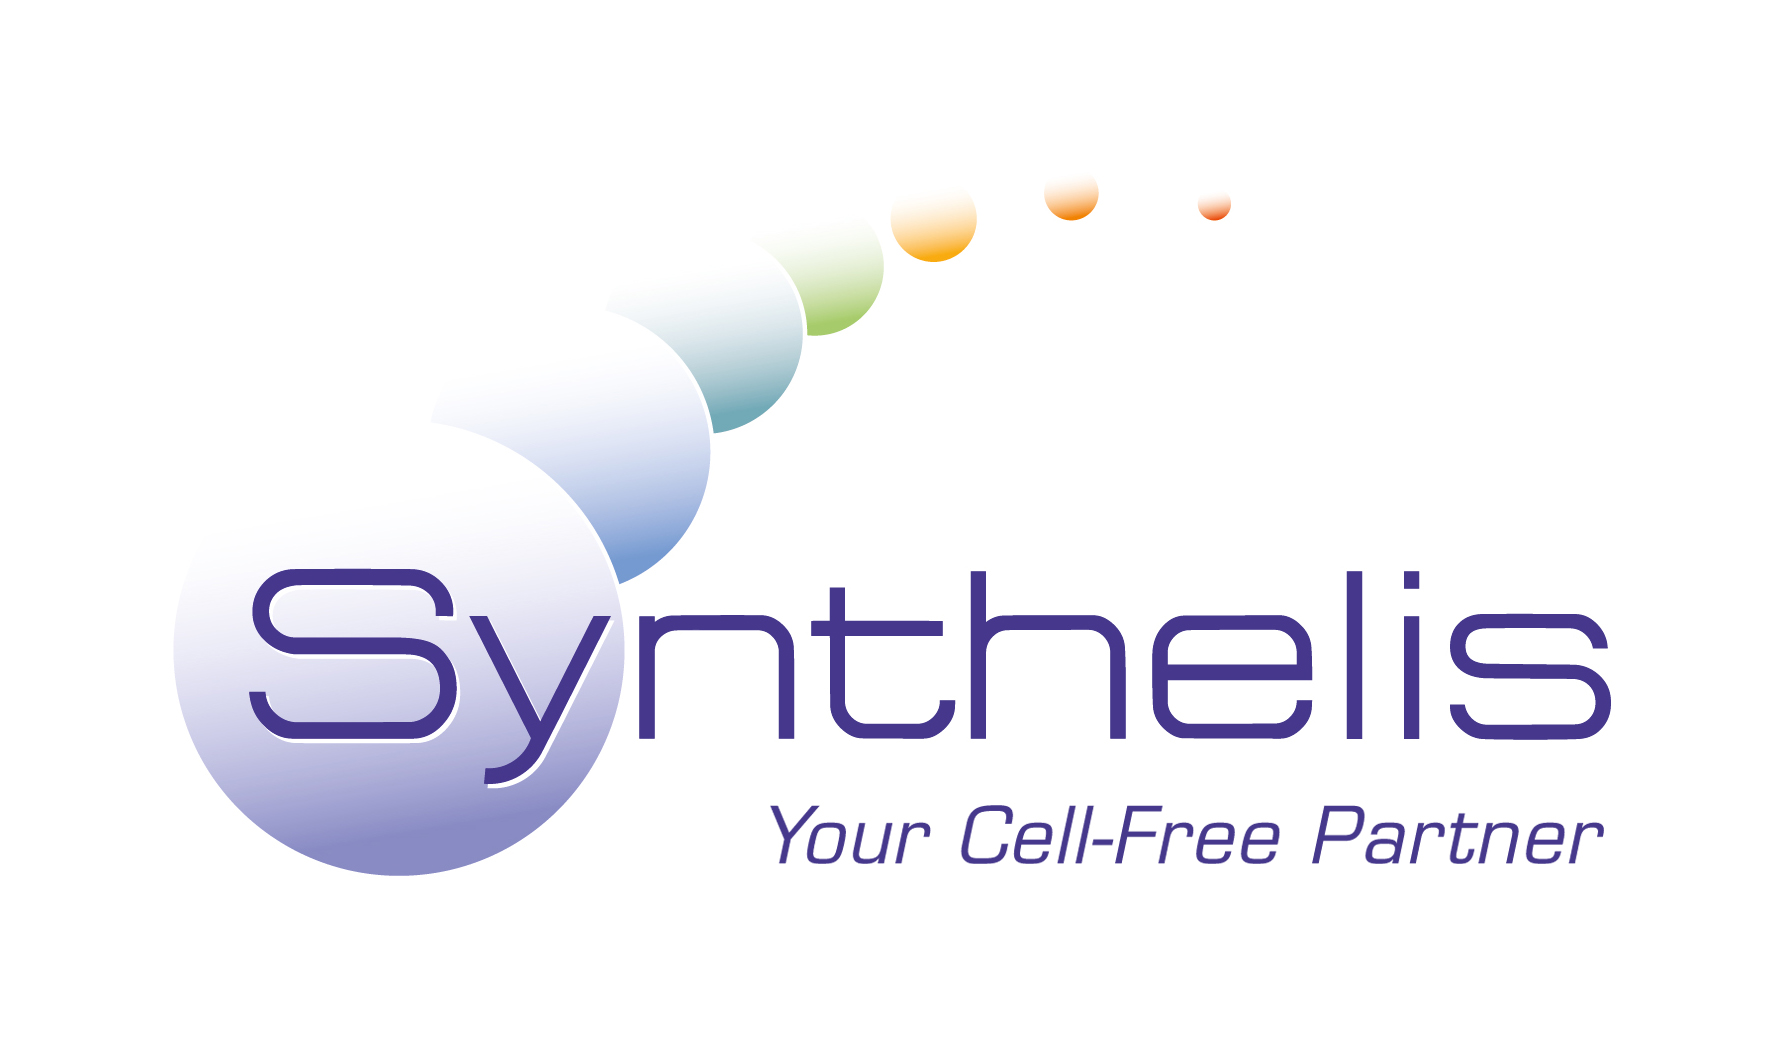 Synthelis